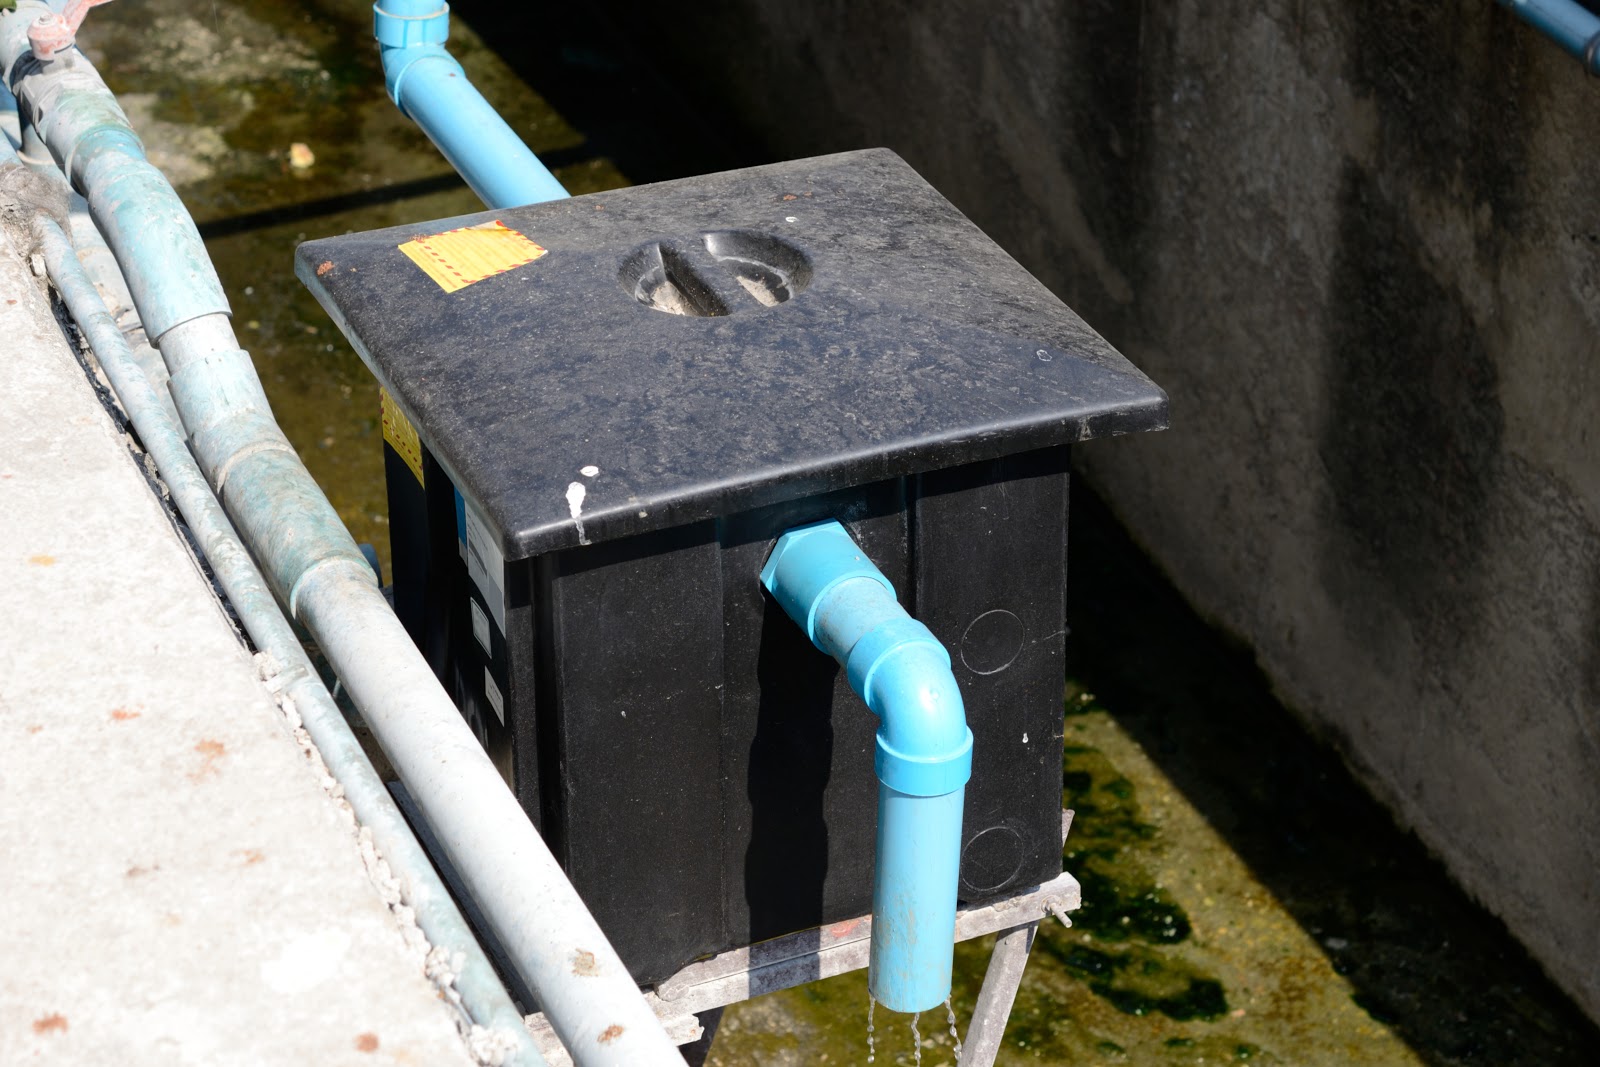 Bates_Environmental_What_Happens_If_a_Grease_Trap_Isnt_Properly_Maintained_Thumbnail.jpg